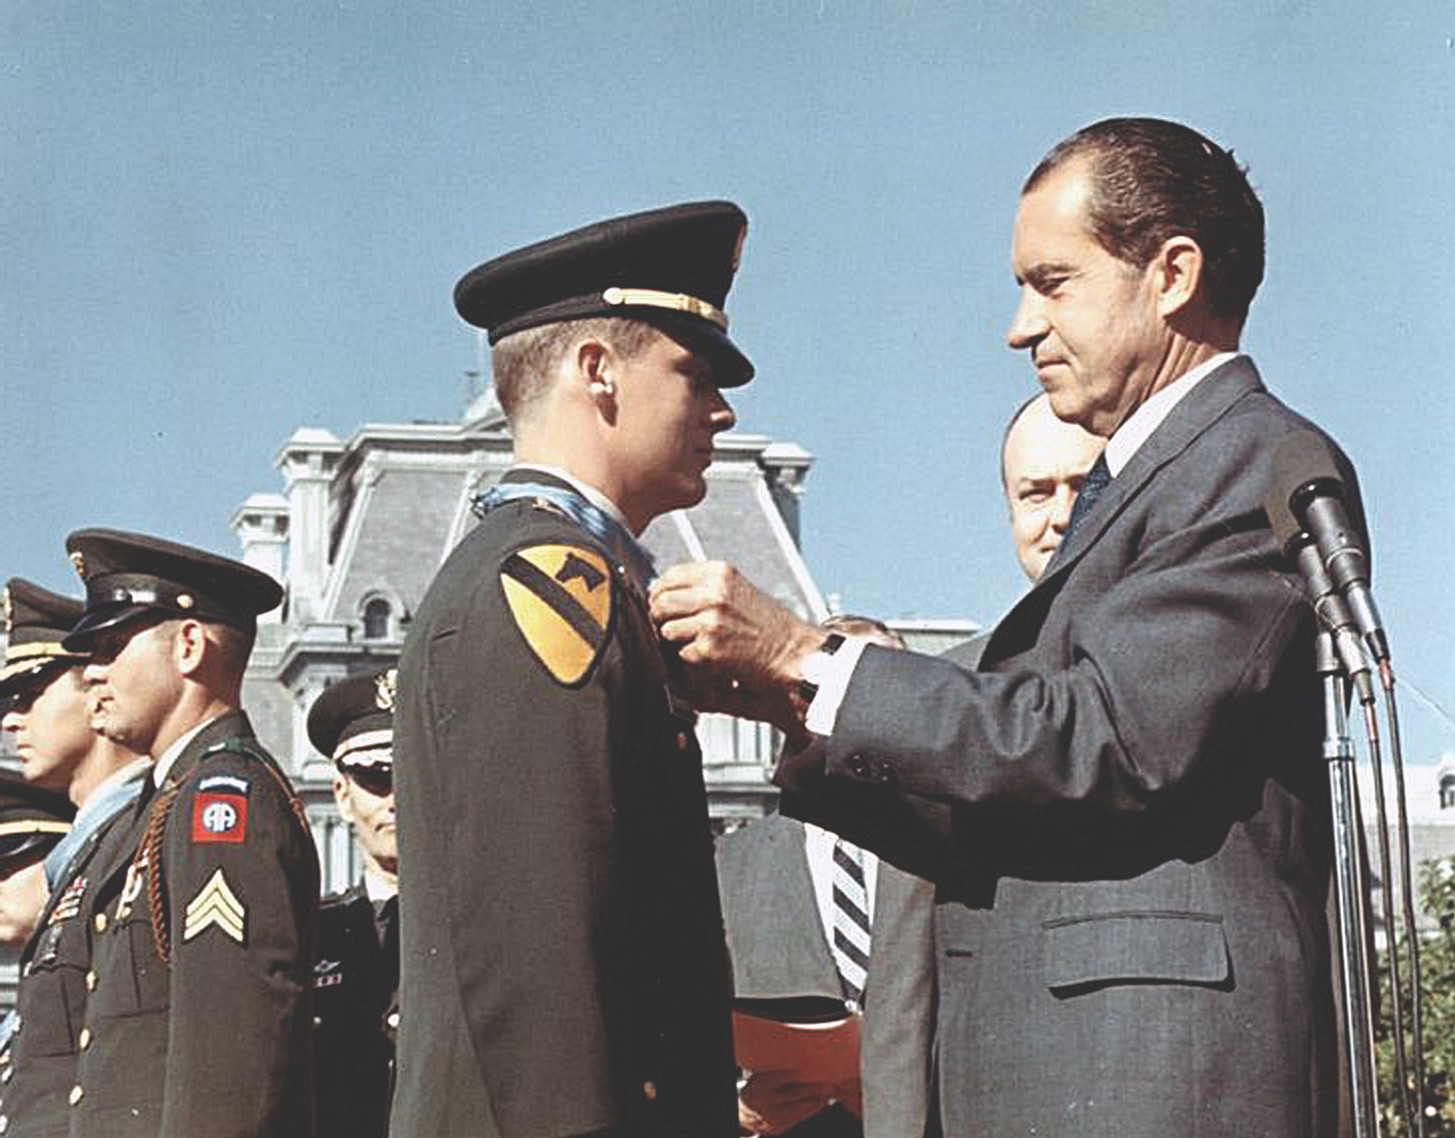 Sprayberry receives the Medal of Honor from President Nixon in 1969